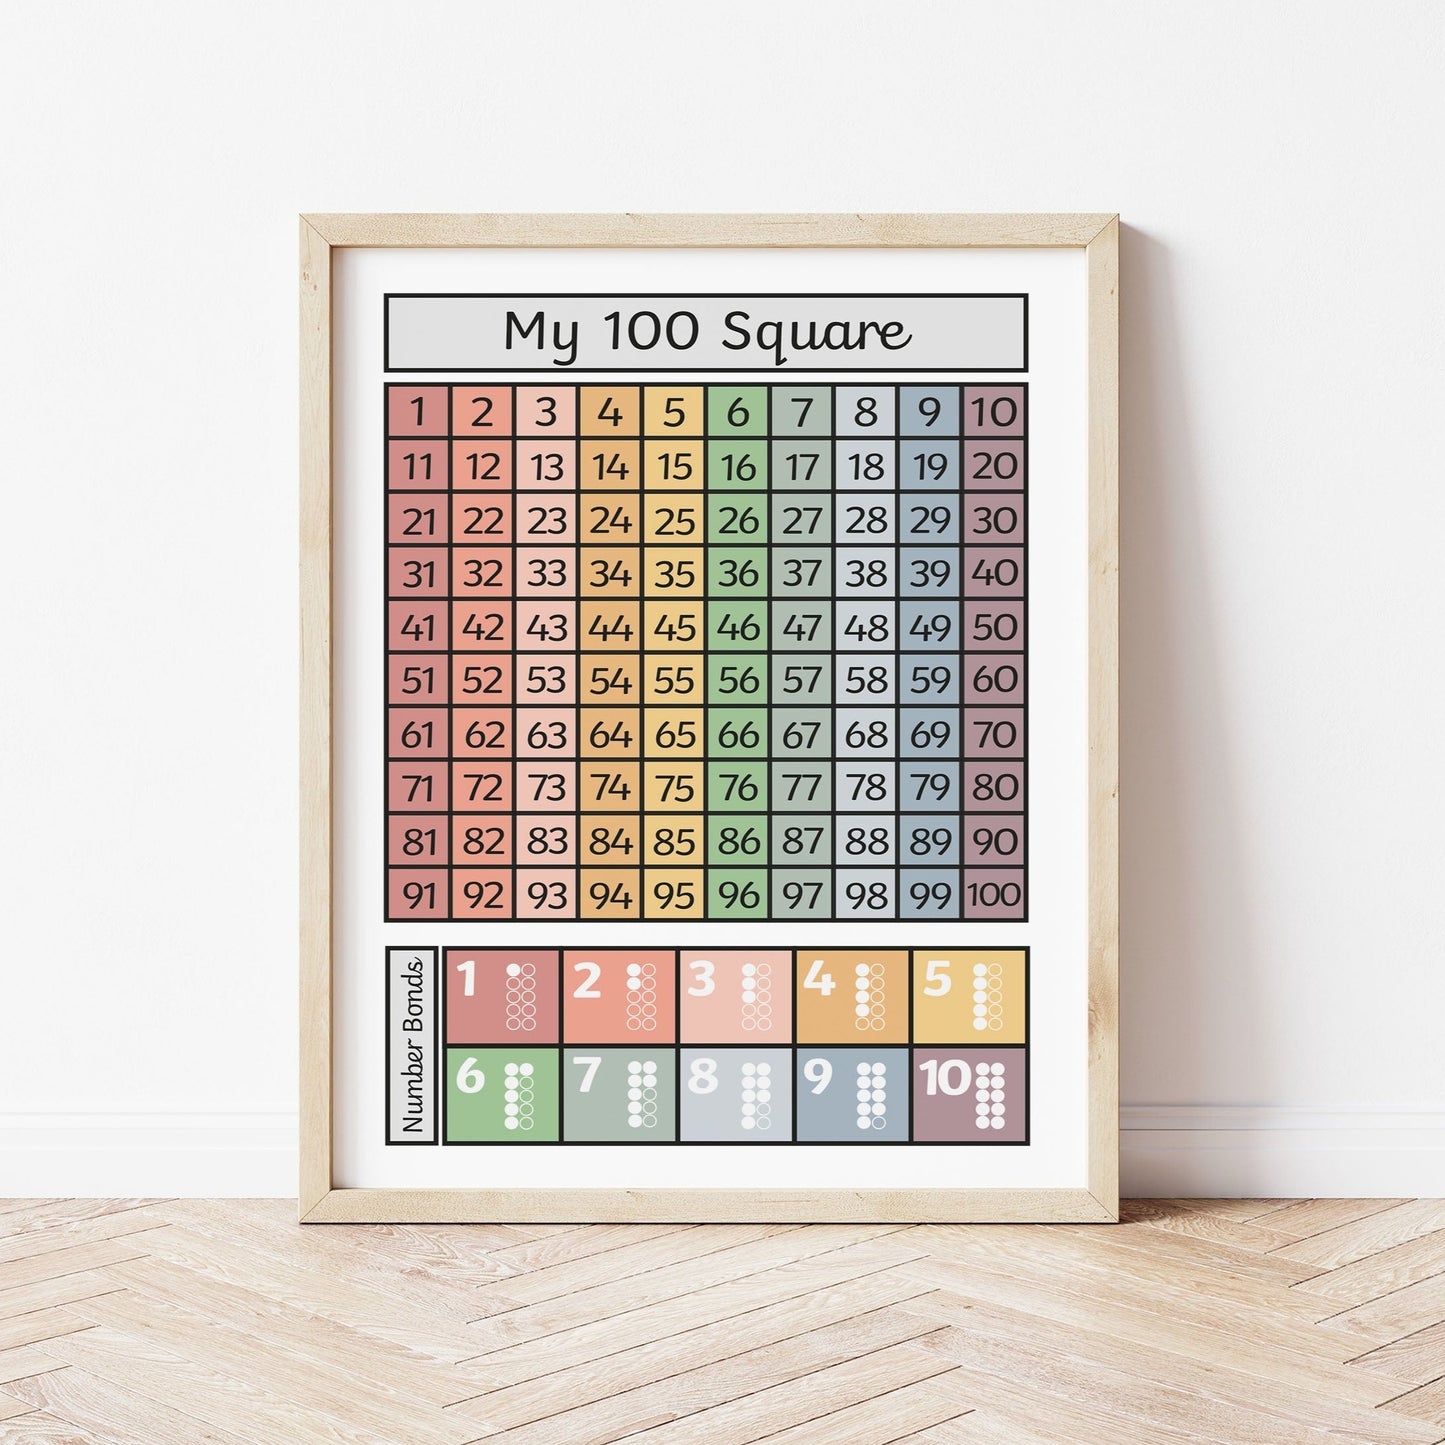 100 Square Art Print by The Little Jones (15 Sizes Available)